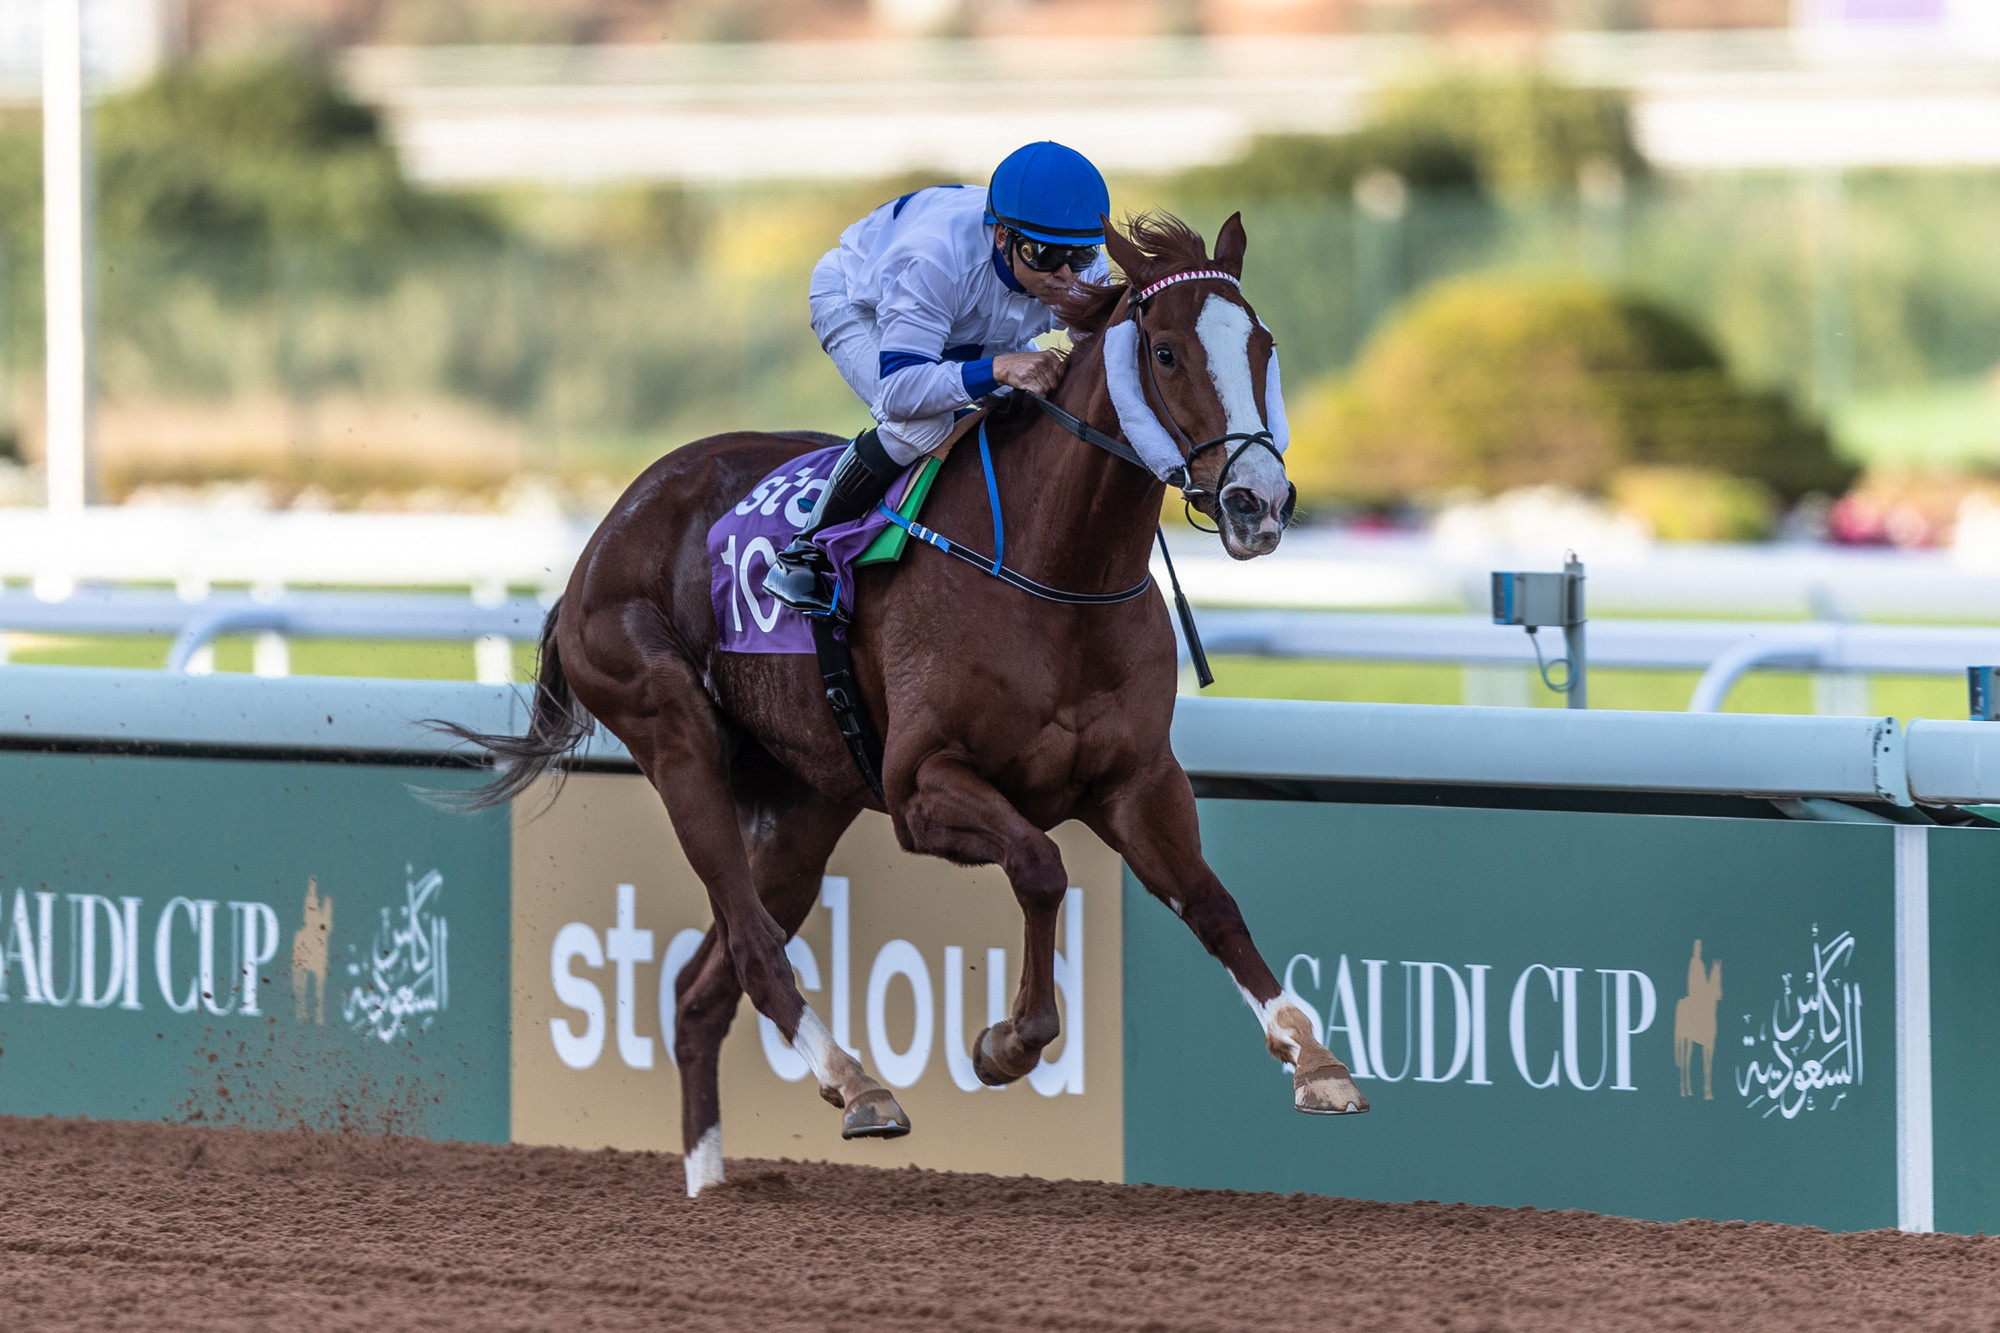 Mike Smith notching his second win in the four-races on the locally-trained Sun Hat. Photo: Jockey Club of Saudi Arabia